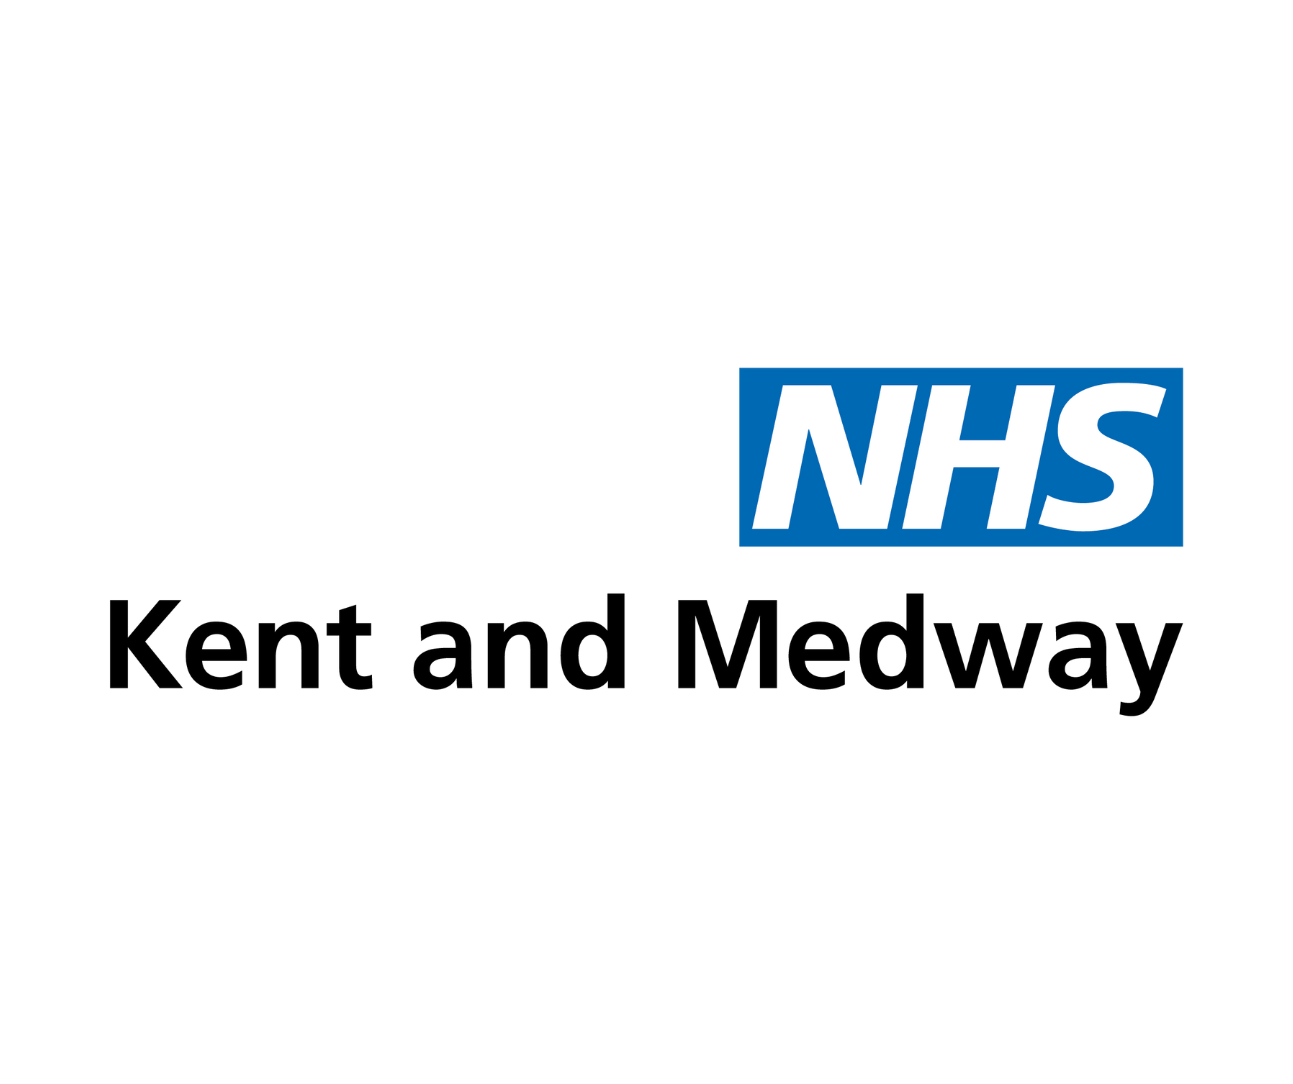 NHS Kent & Medway Innovation Hub Primary Care Reverse Pitching Event